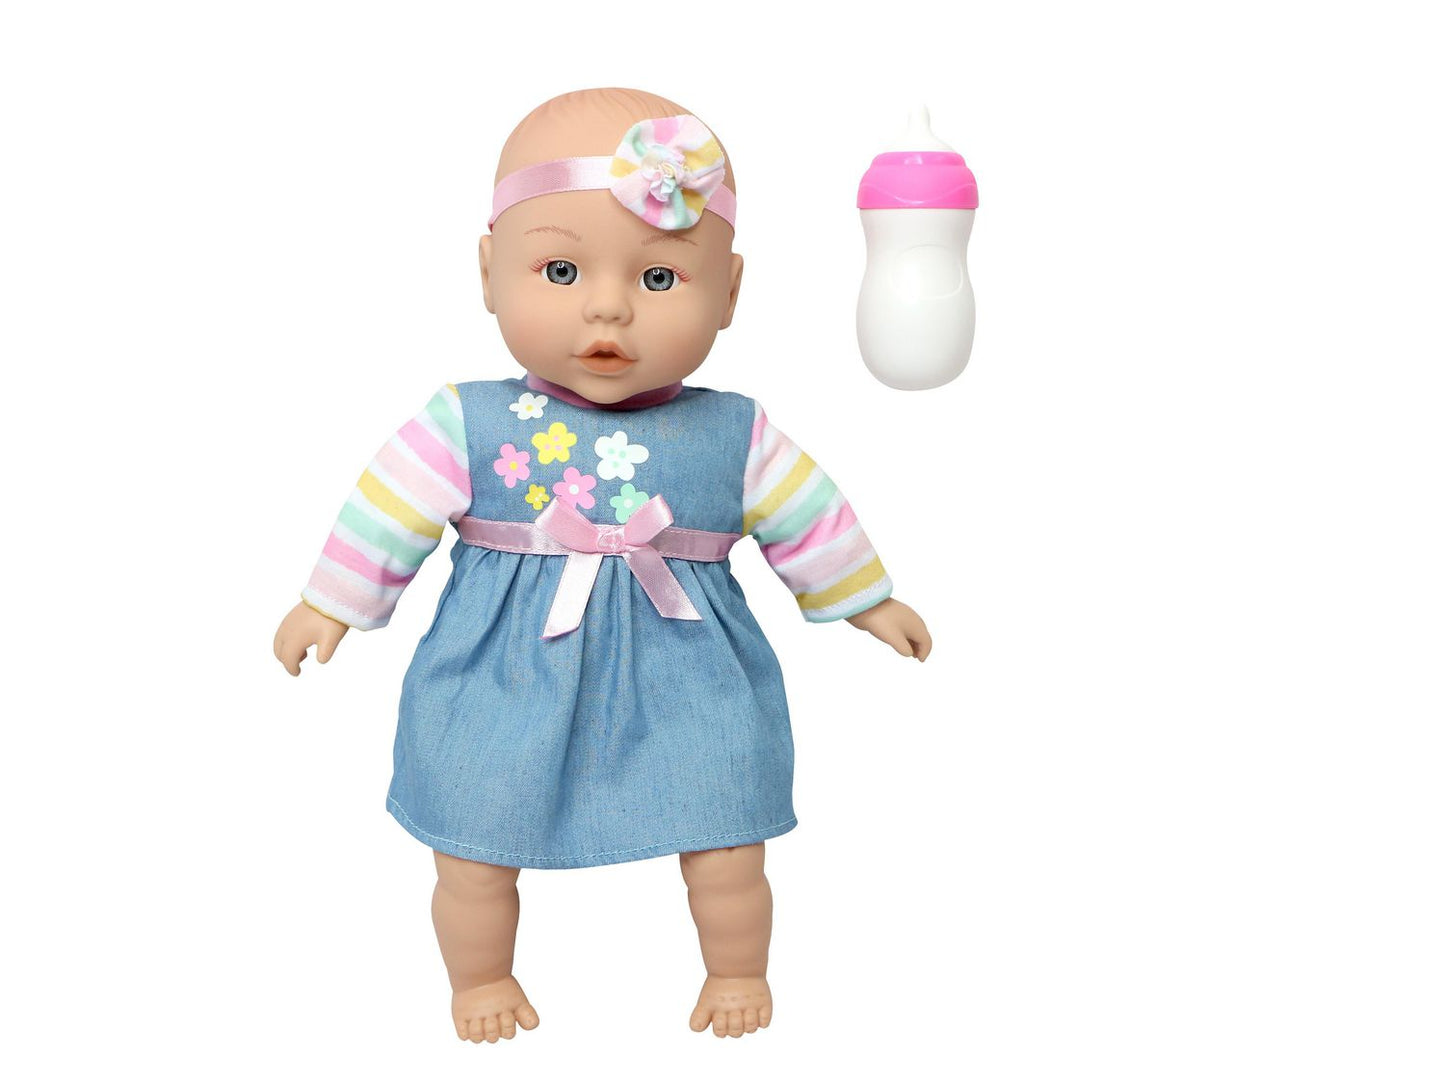 My Sweet Baby Snuggle & Feed Time 12.5" Baby Doll Blue Theme - Open Box